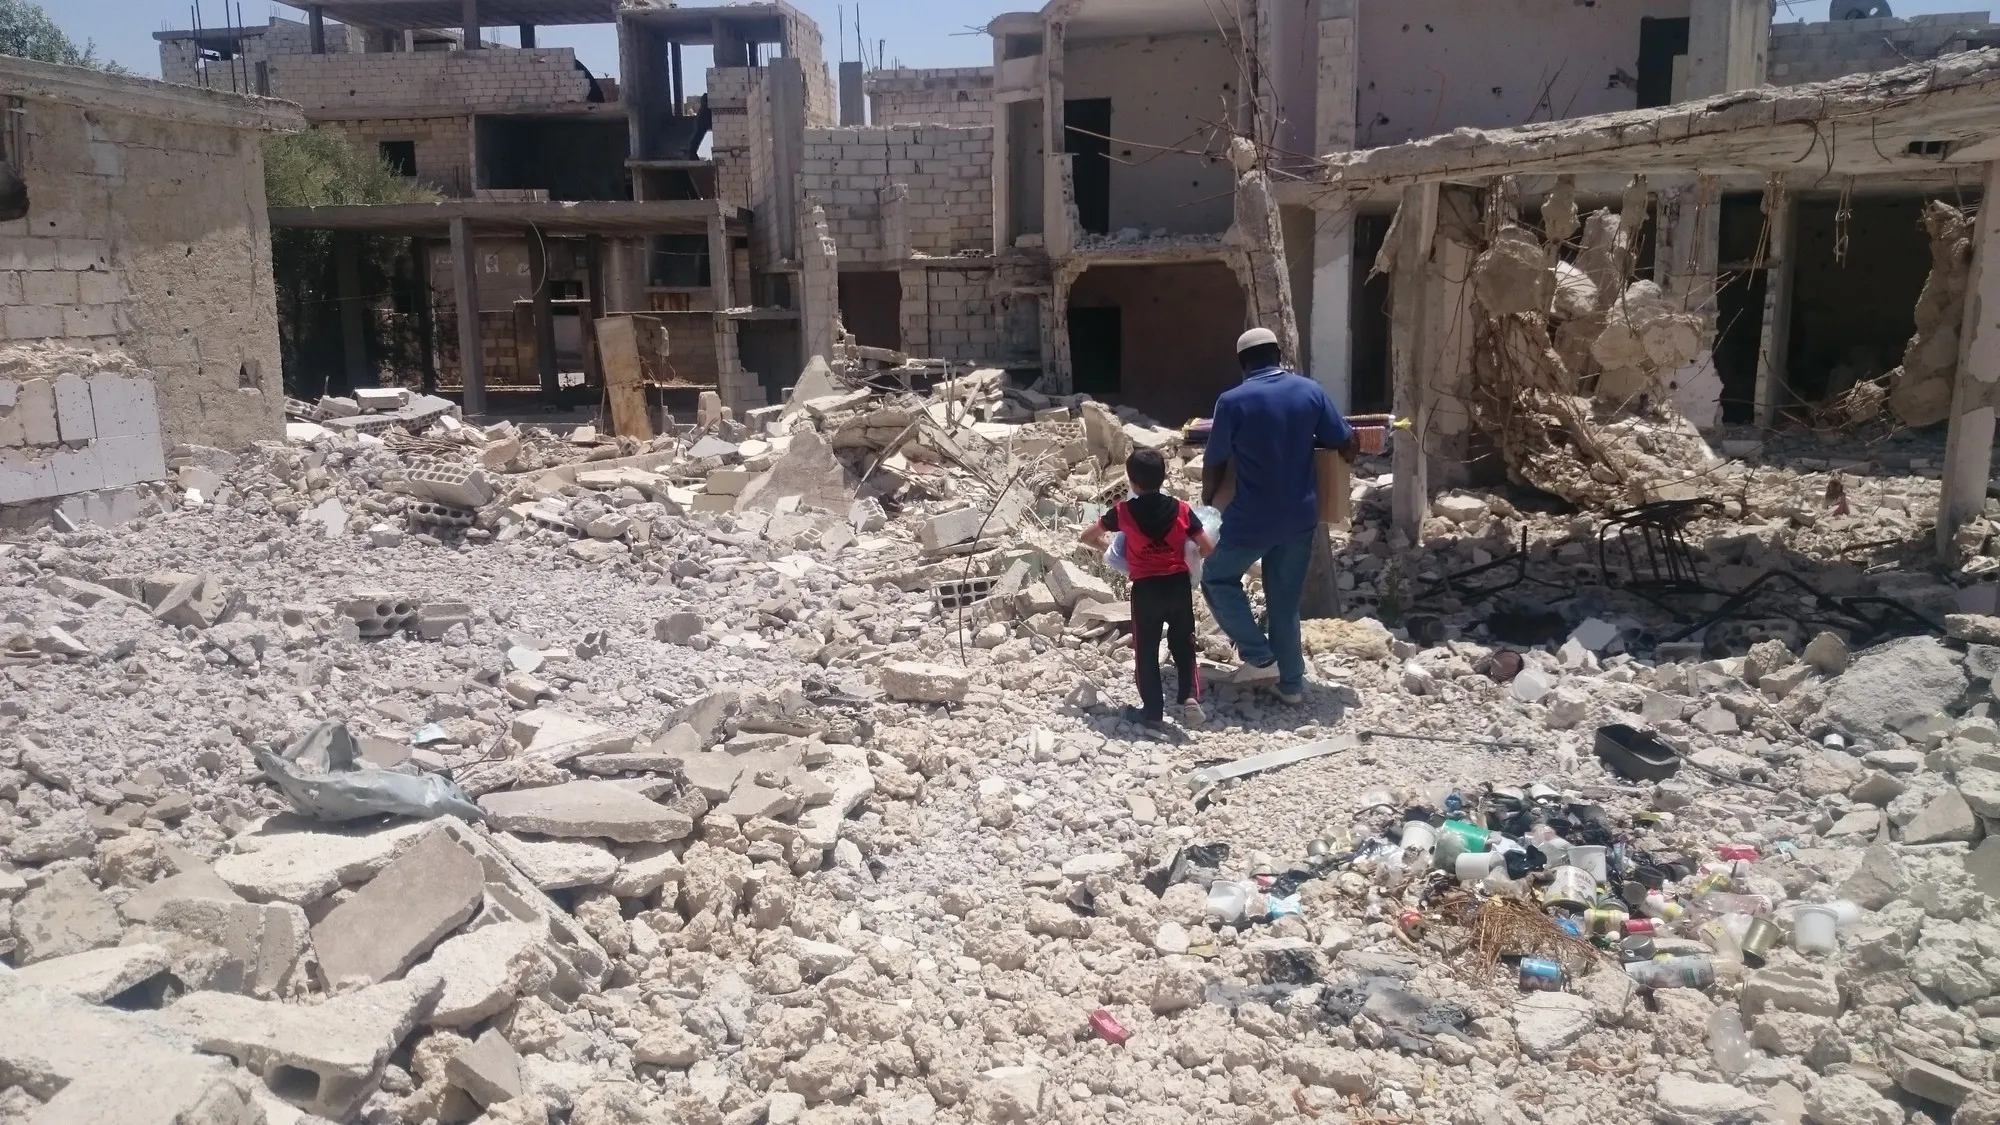 A man and a child walk through the rubble of a destroyed building.